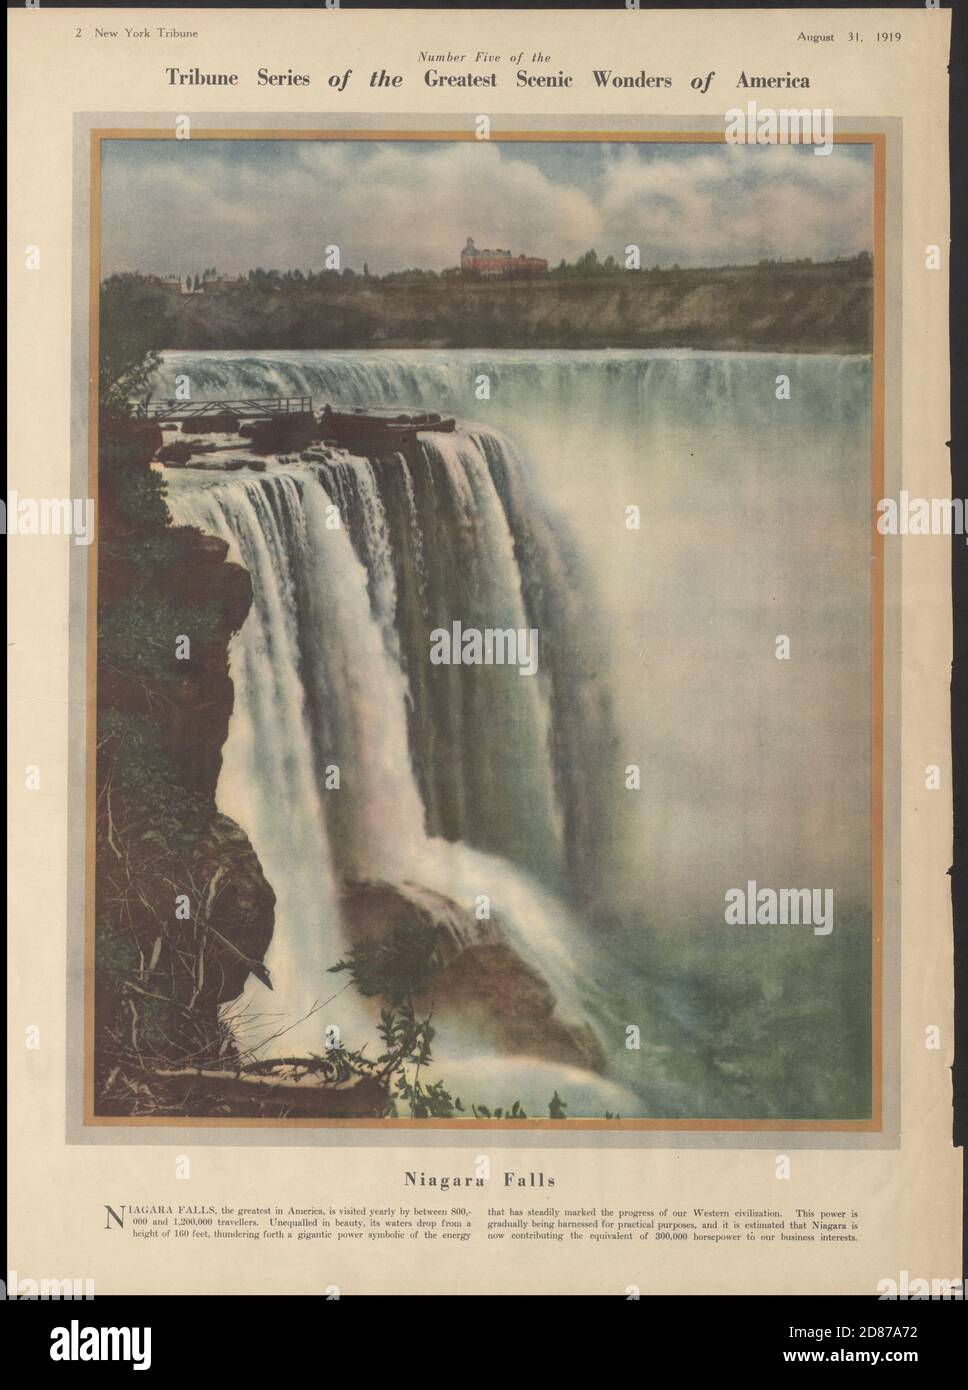 Niagara Falls, Ontario, New York Tribune page, Tribune Series of the Greatest Scenic Wonders of America, cascade. 31 août 1919. Banque D'Images